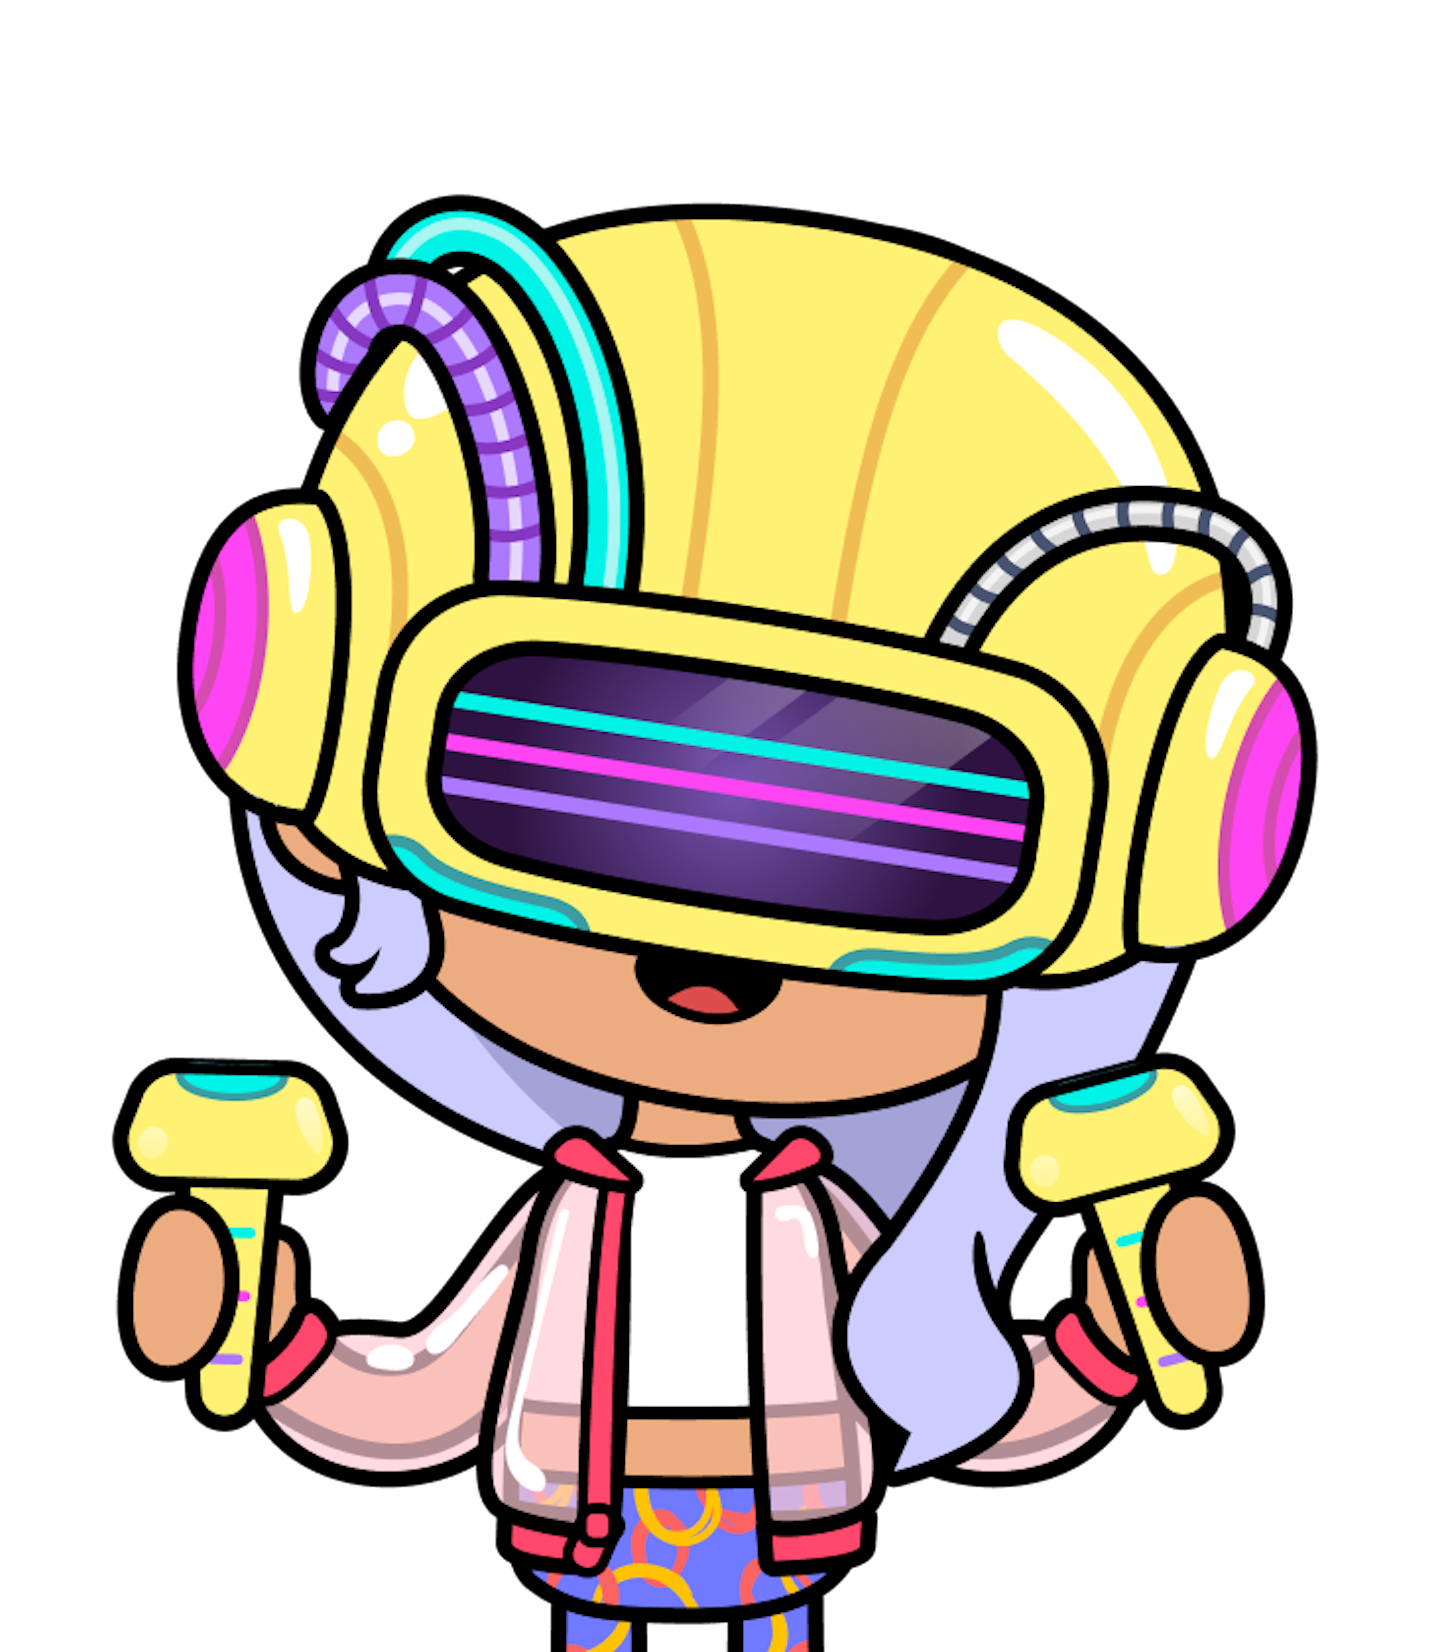 This is an image of a character from Toca Boca World with a yellow VR headset on